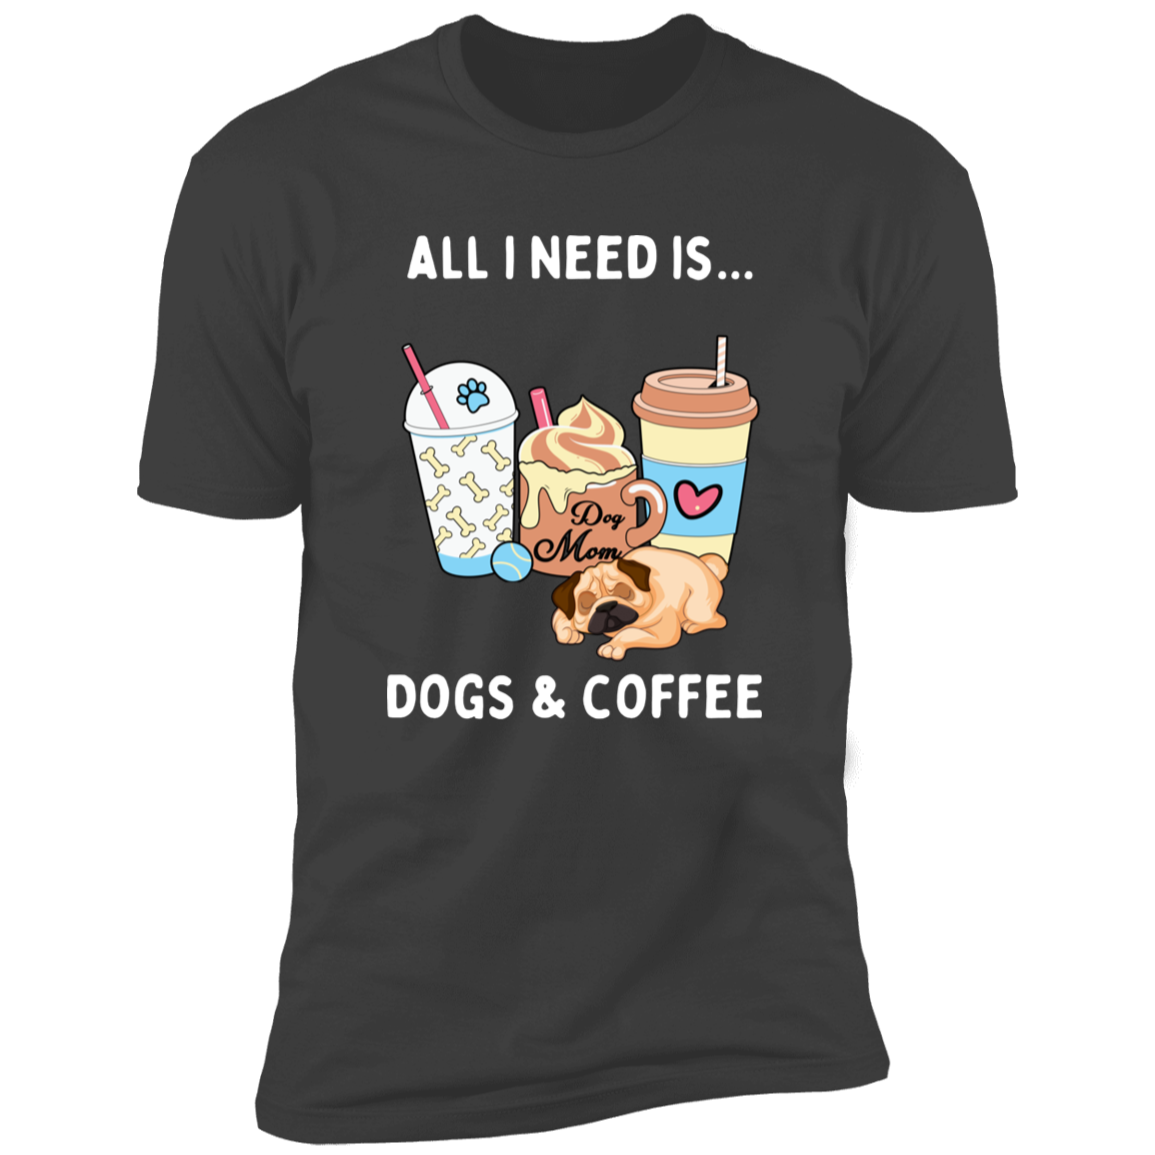 All I Need is Dogs and Coffee, Dog shirt for humas, in heavy metal gray